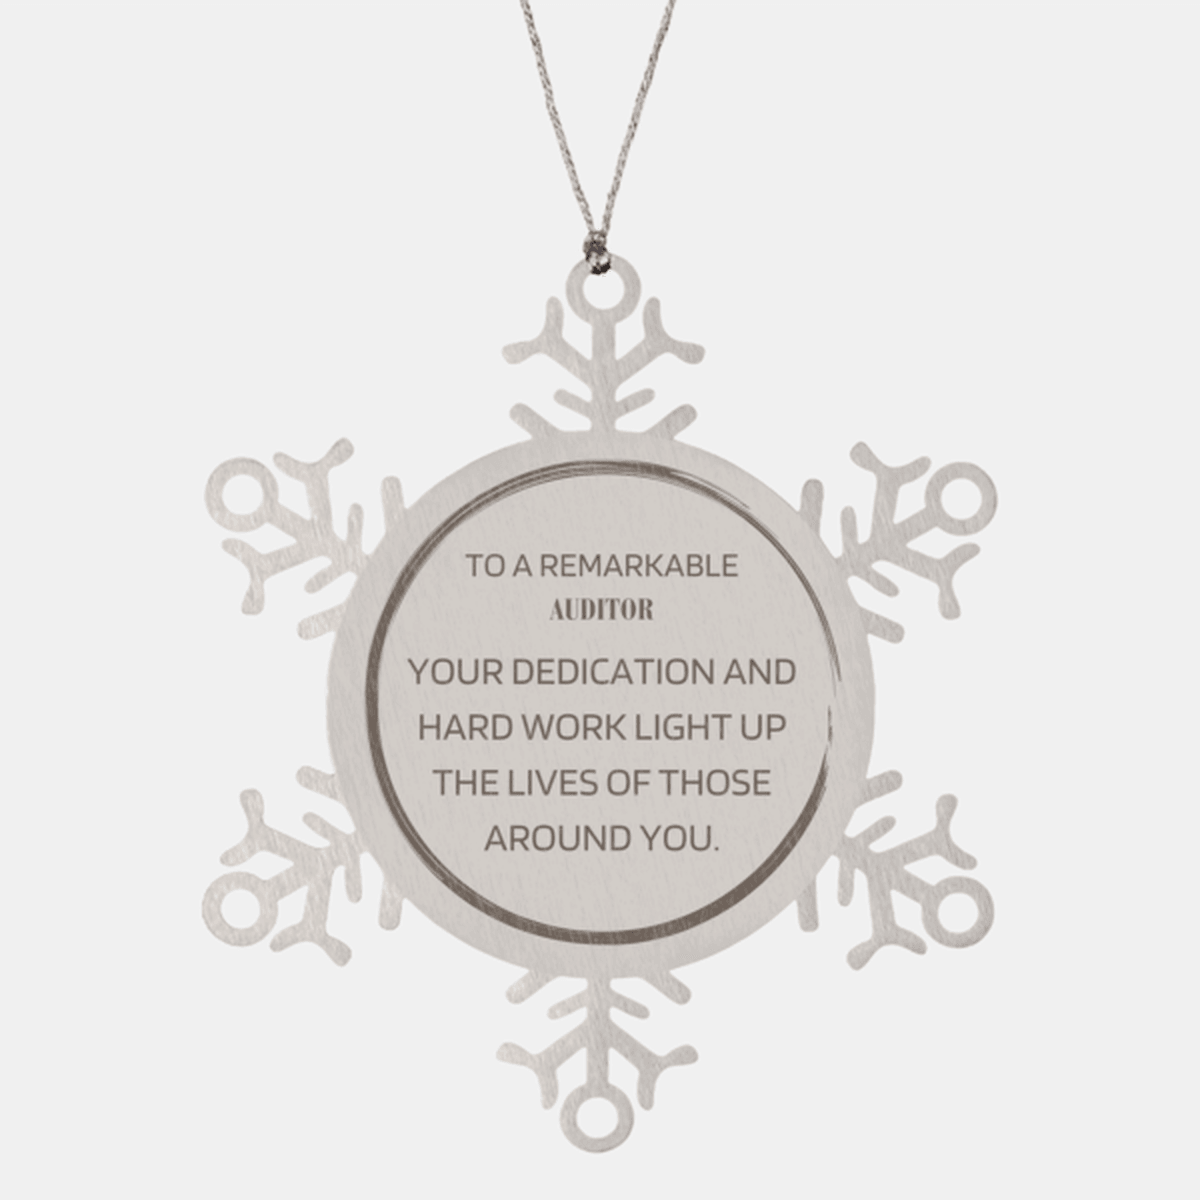 Remarkable Auditor Gifts, Your dedication and hard work, Inspirational Birthday Christmas Unique Snowflake Ornament For Auditor, Coworkers, Men, Women, Friends - Mallard Moon Gift Shop